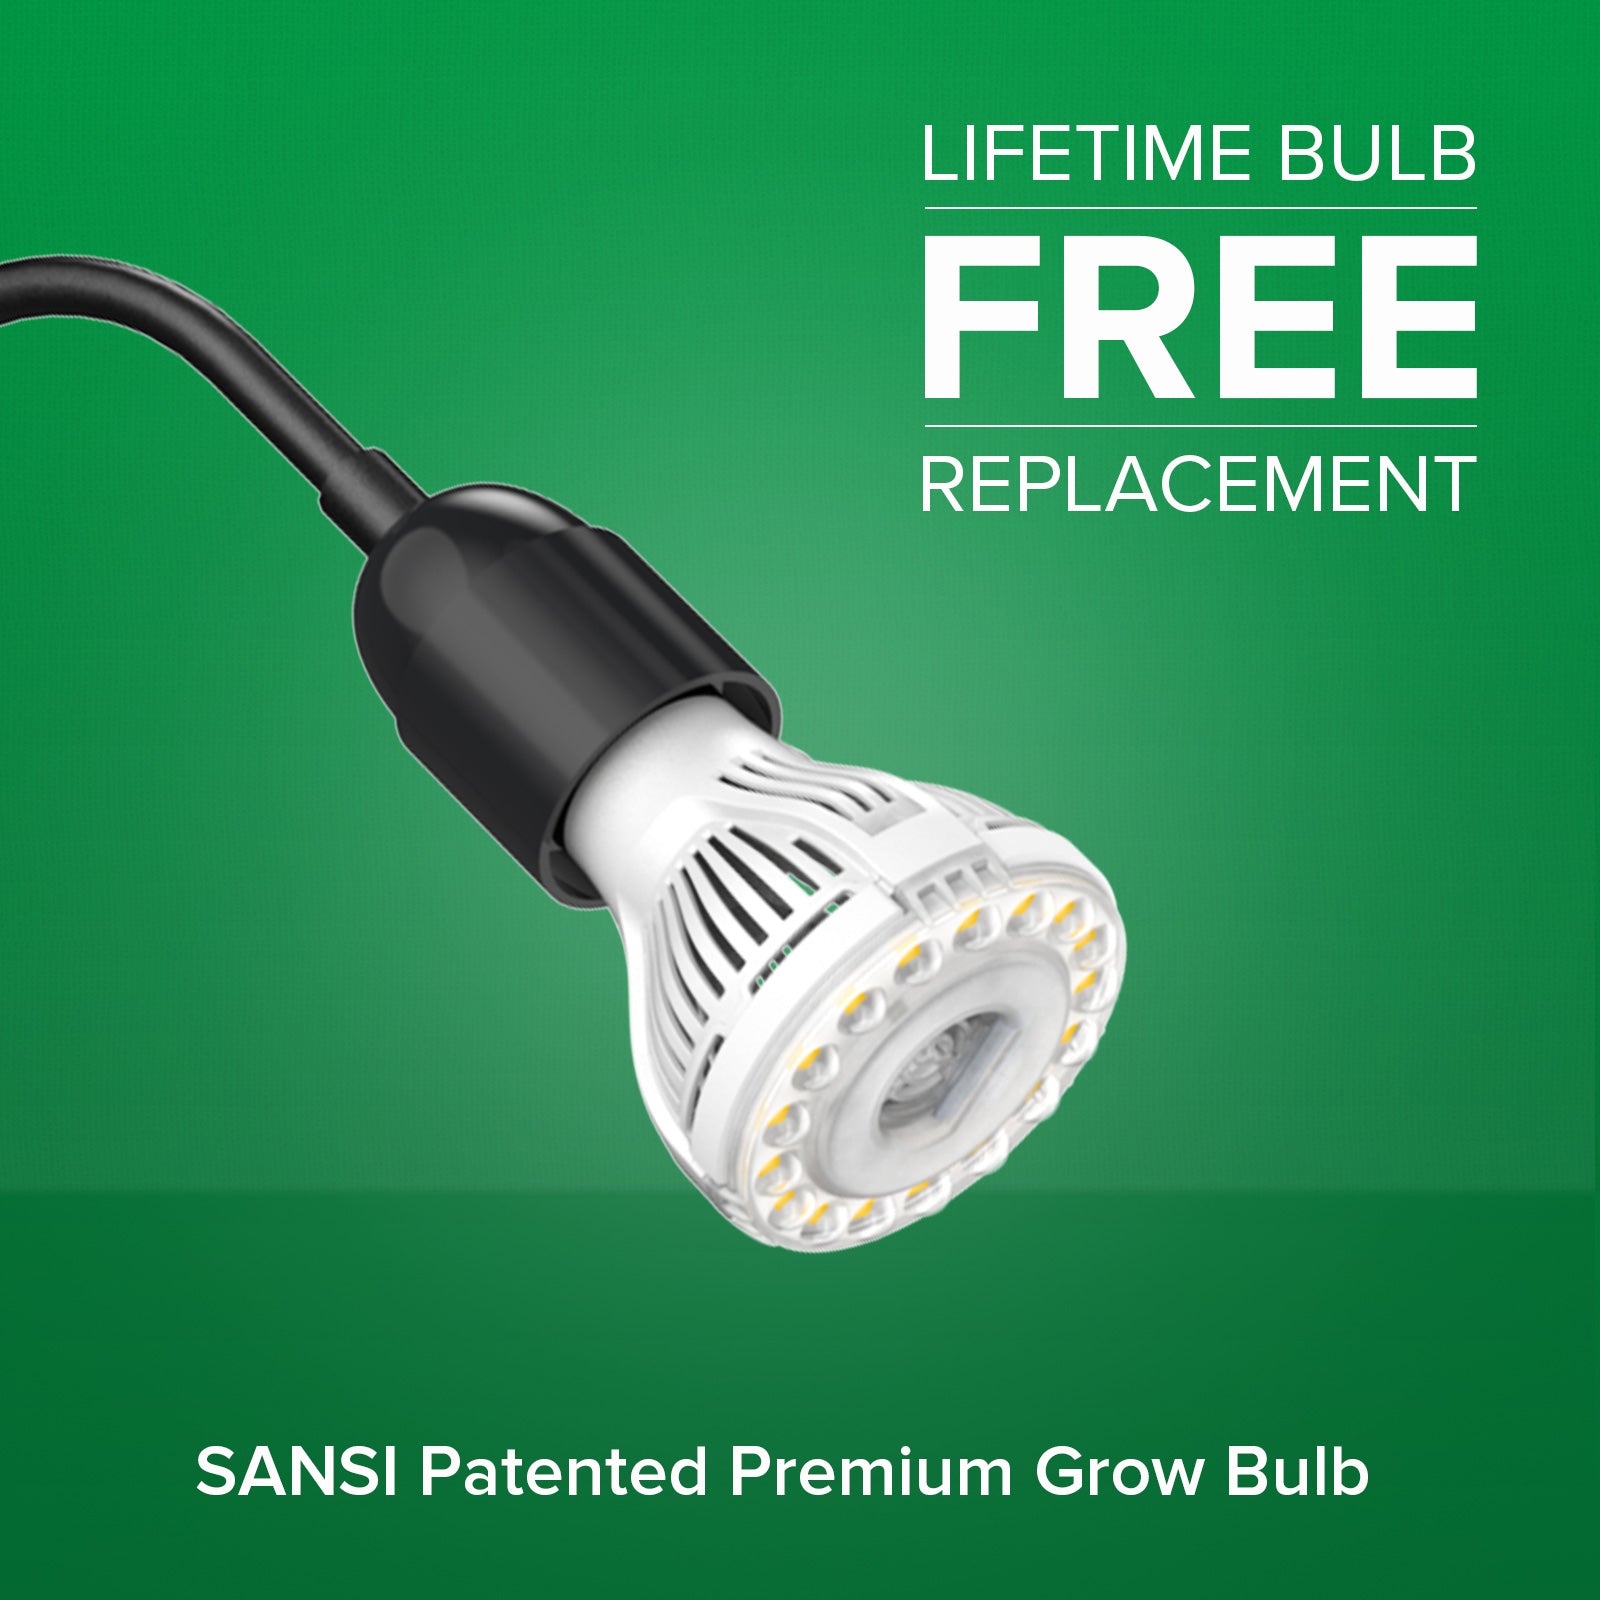 SANSI provides lifetime Free bulb replacement for 40W Adjustable 4-Head Clip-on LED Grow Light.